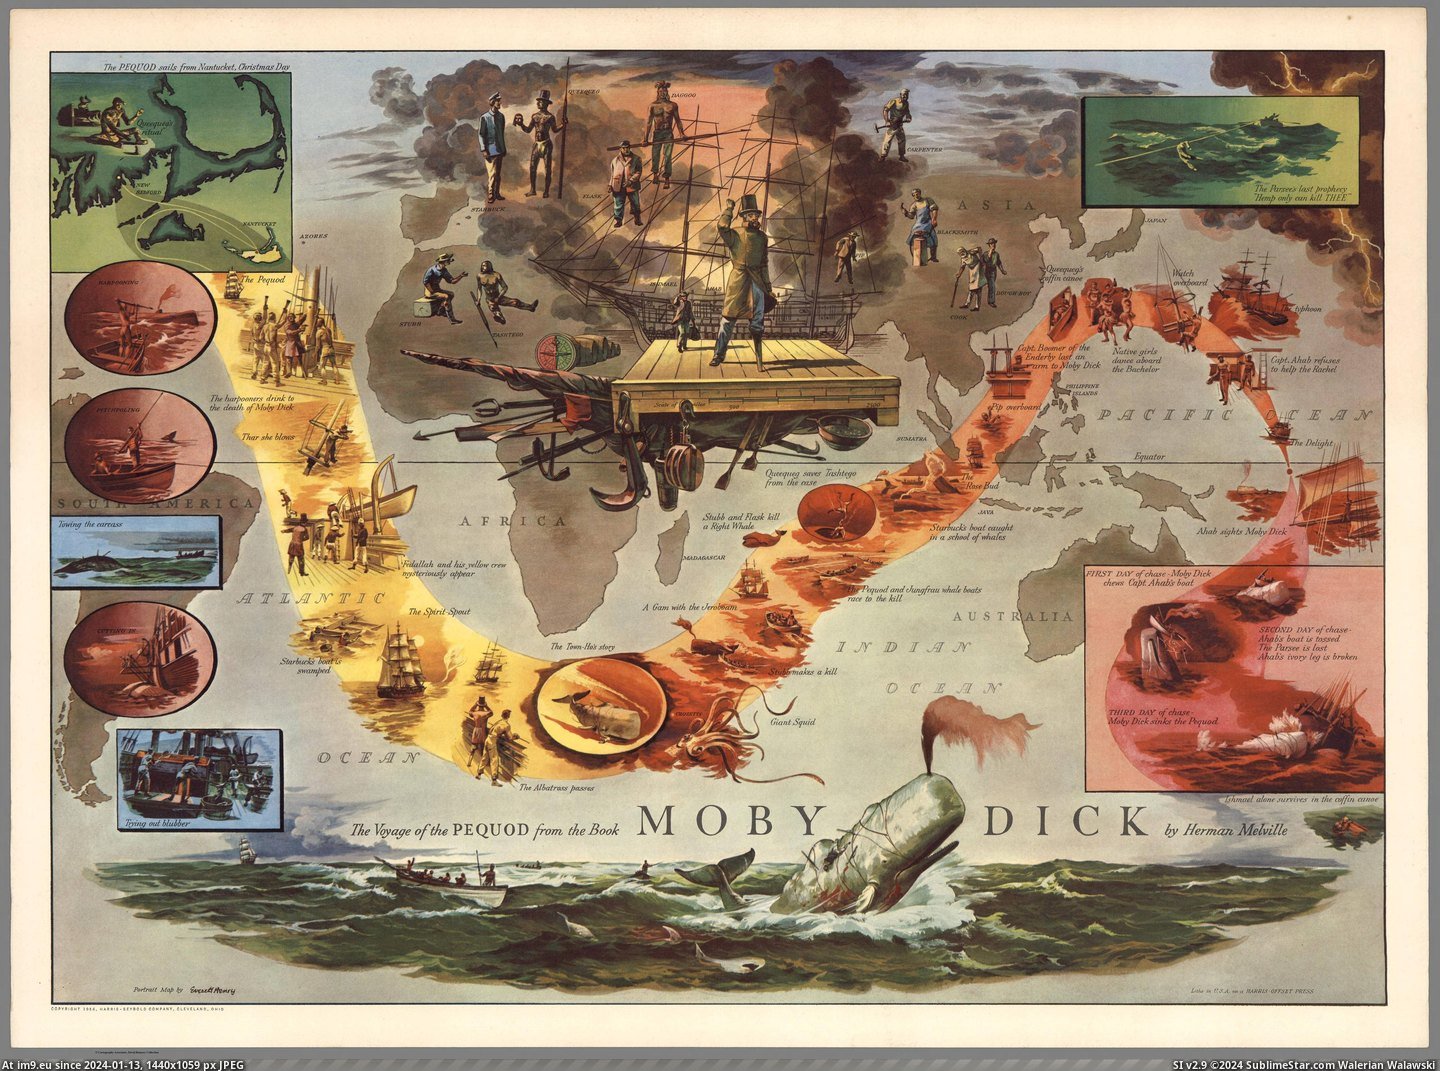 #Map #Dick #Book #Created #Everett #Melville #Pequod #Henry #Moby #Herman #Voyage [Mapporn] The Voyage of the Pequod from the Book Moby Dick by Herman Melville. Map created by Everett Henry in 1956 [5118x3776] Pic. (Image of album My r/MAPS favs))